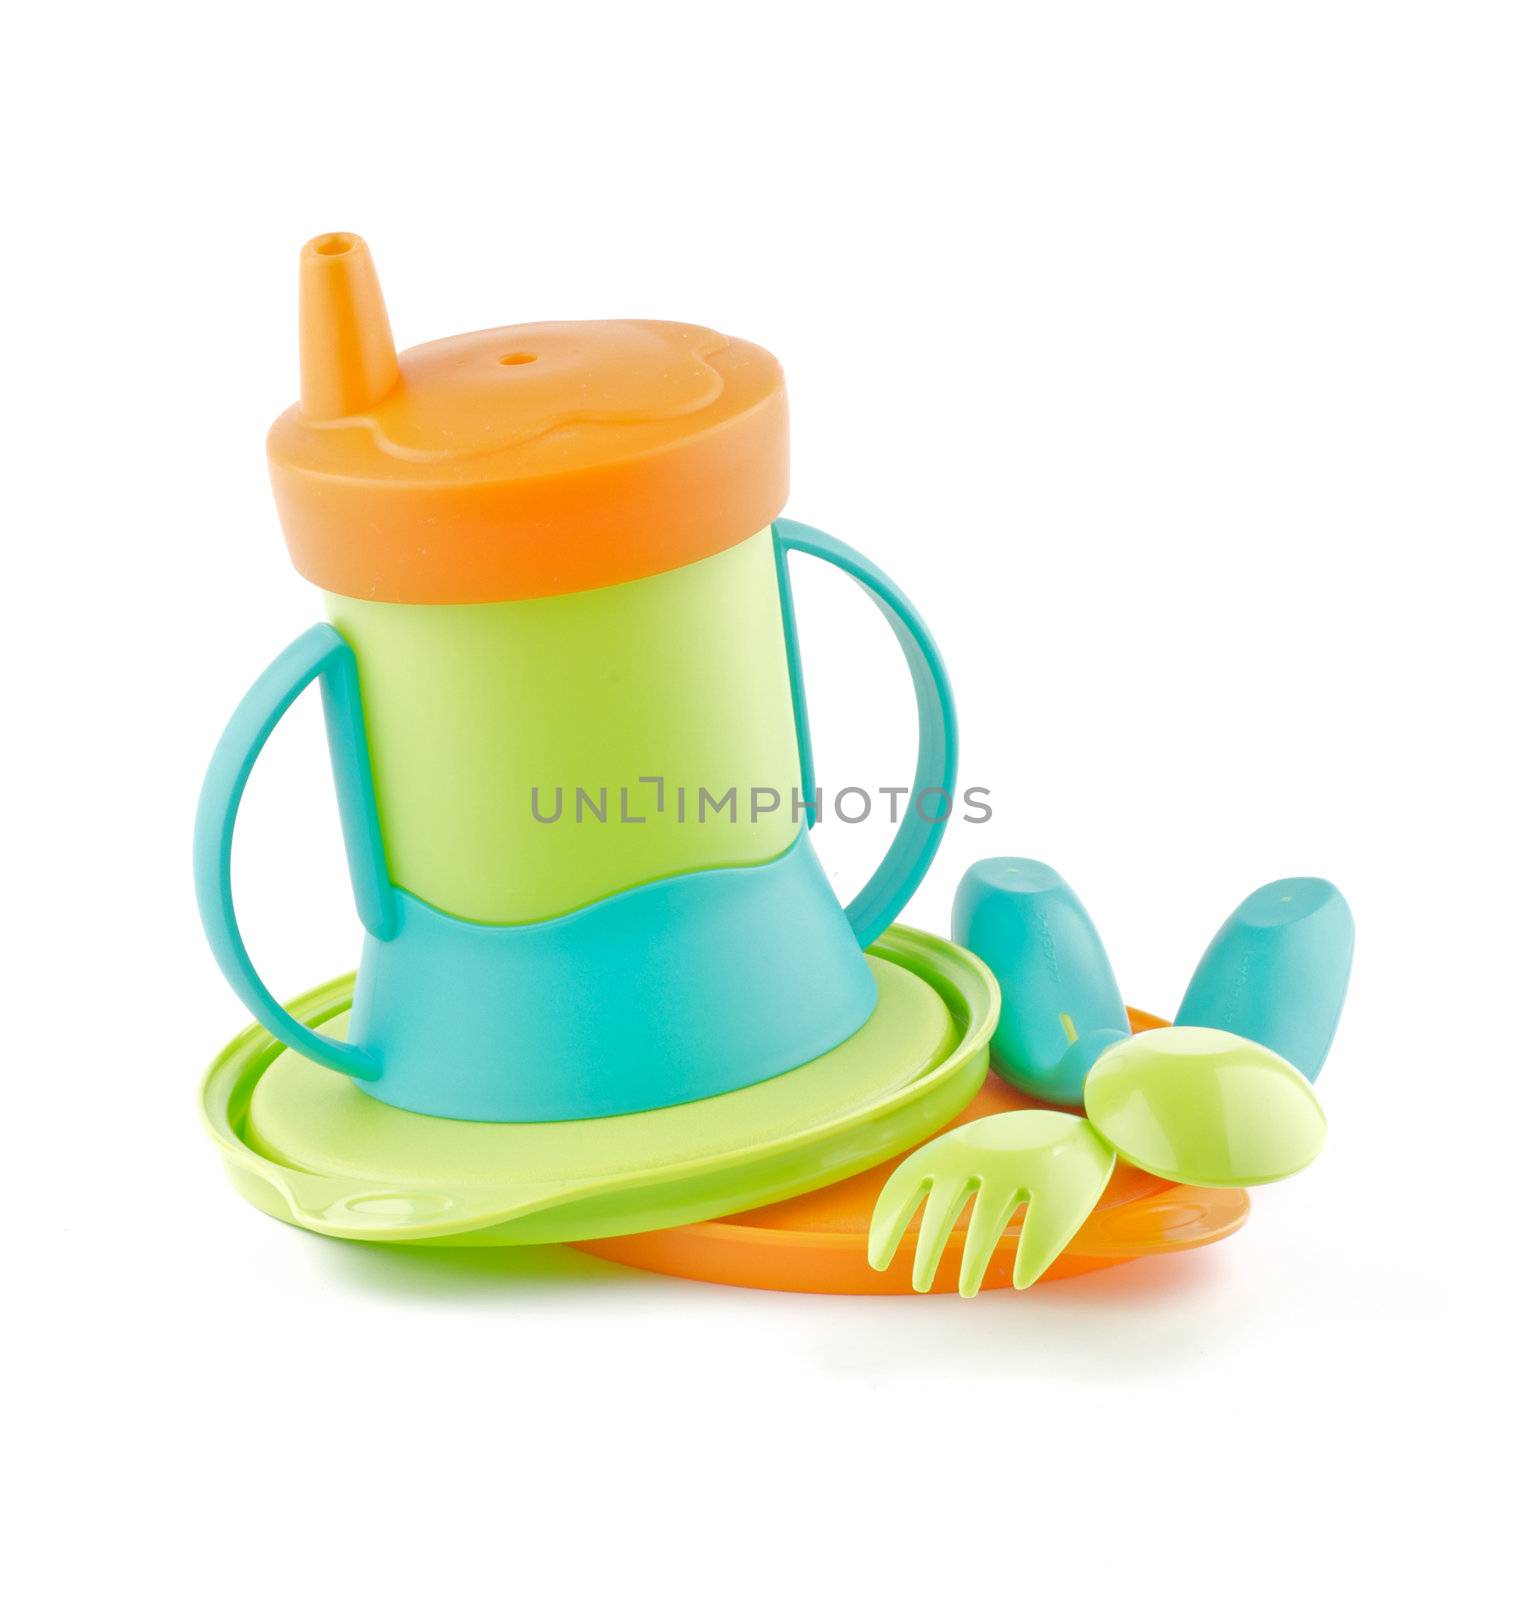 Multi Colored Baby Bottle and Baby utensil isolated on white background